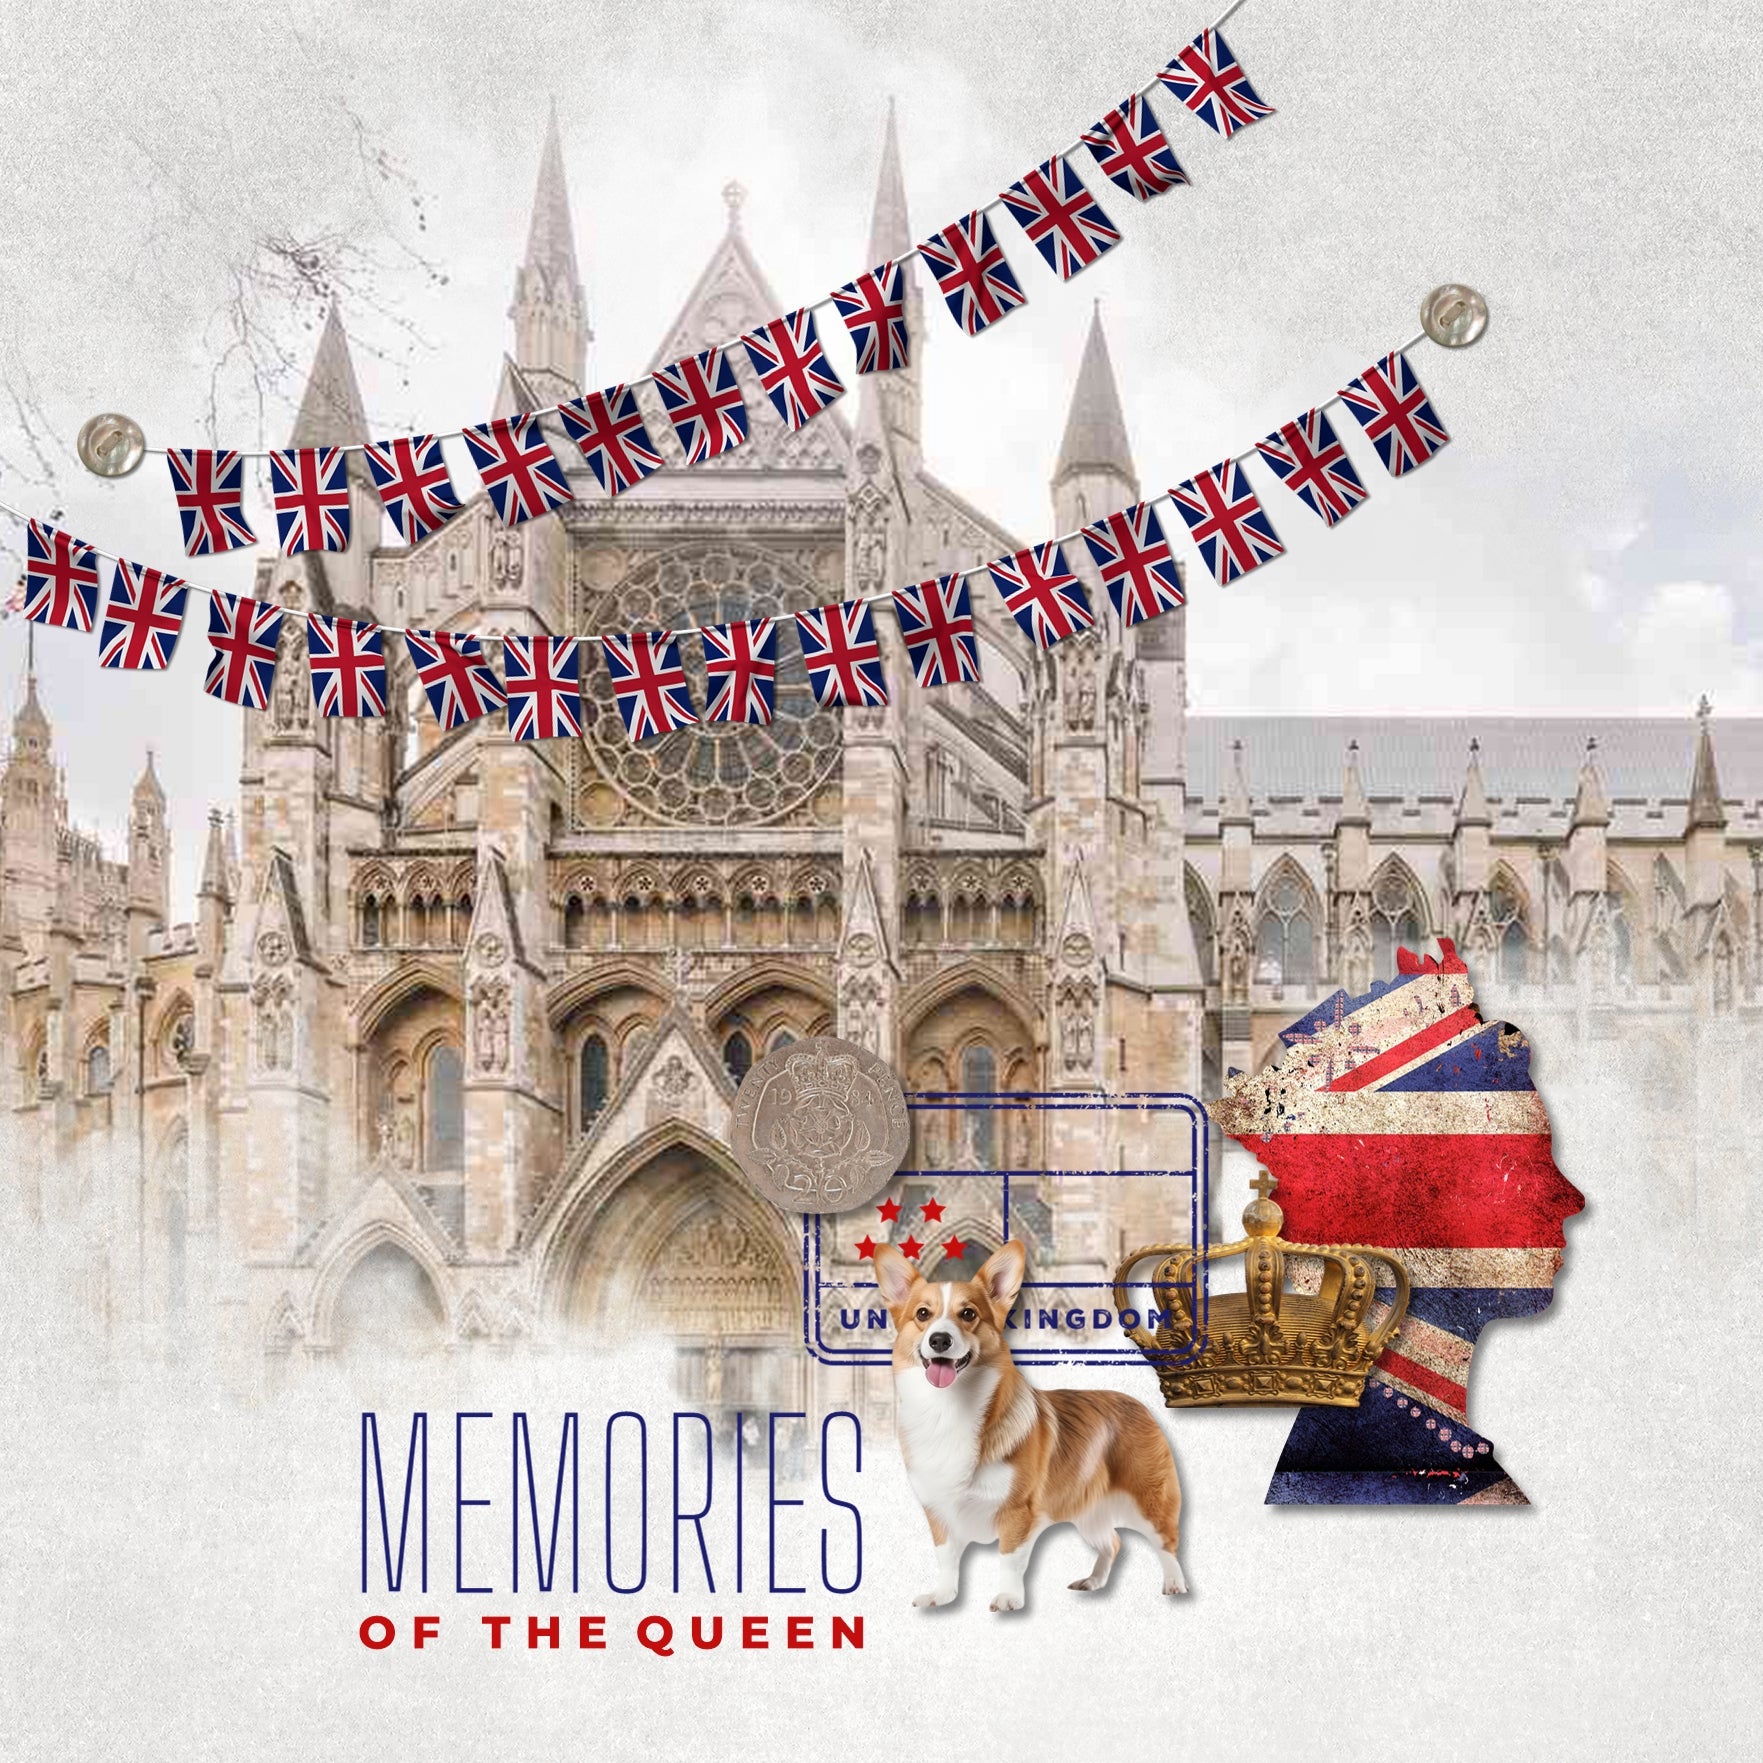 Celebrate the United Kingdom, England, Scotland, Northern Ireland, Wales, and all of Europe with these beautiful scenic masked digital art overlays by Lucky Girl Creative! With transparent edges, these masked photographs blend seamlessly into any background paper and make the perfect backdrop for all travel, vacation, and holiday pages.